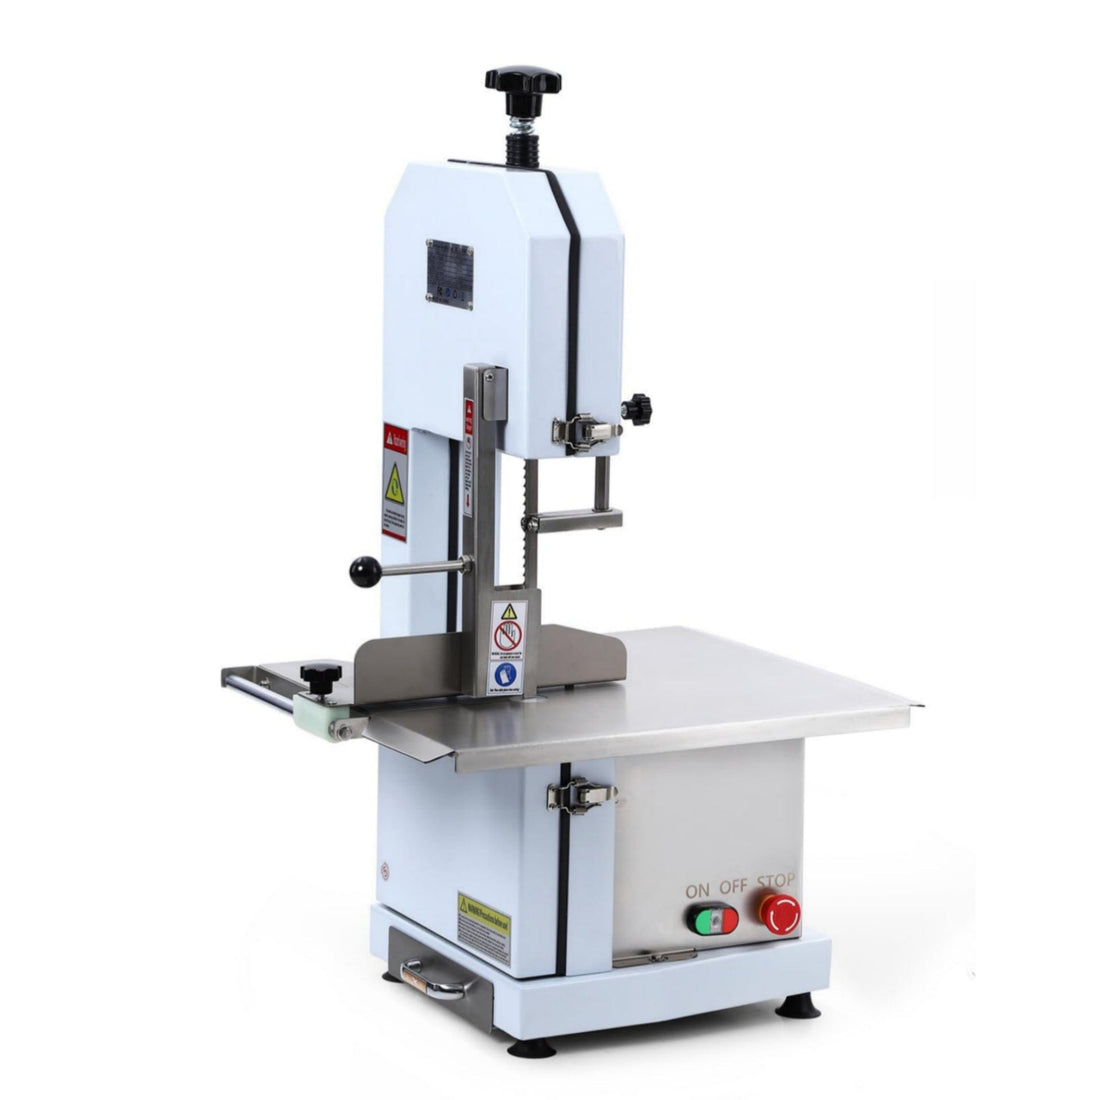 1100W Meat Saw, 0.39-6.6" Thickness, 6 Blades - Butchering